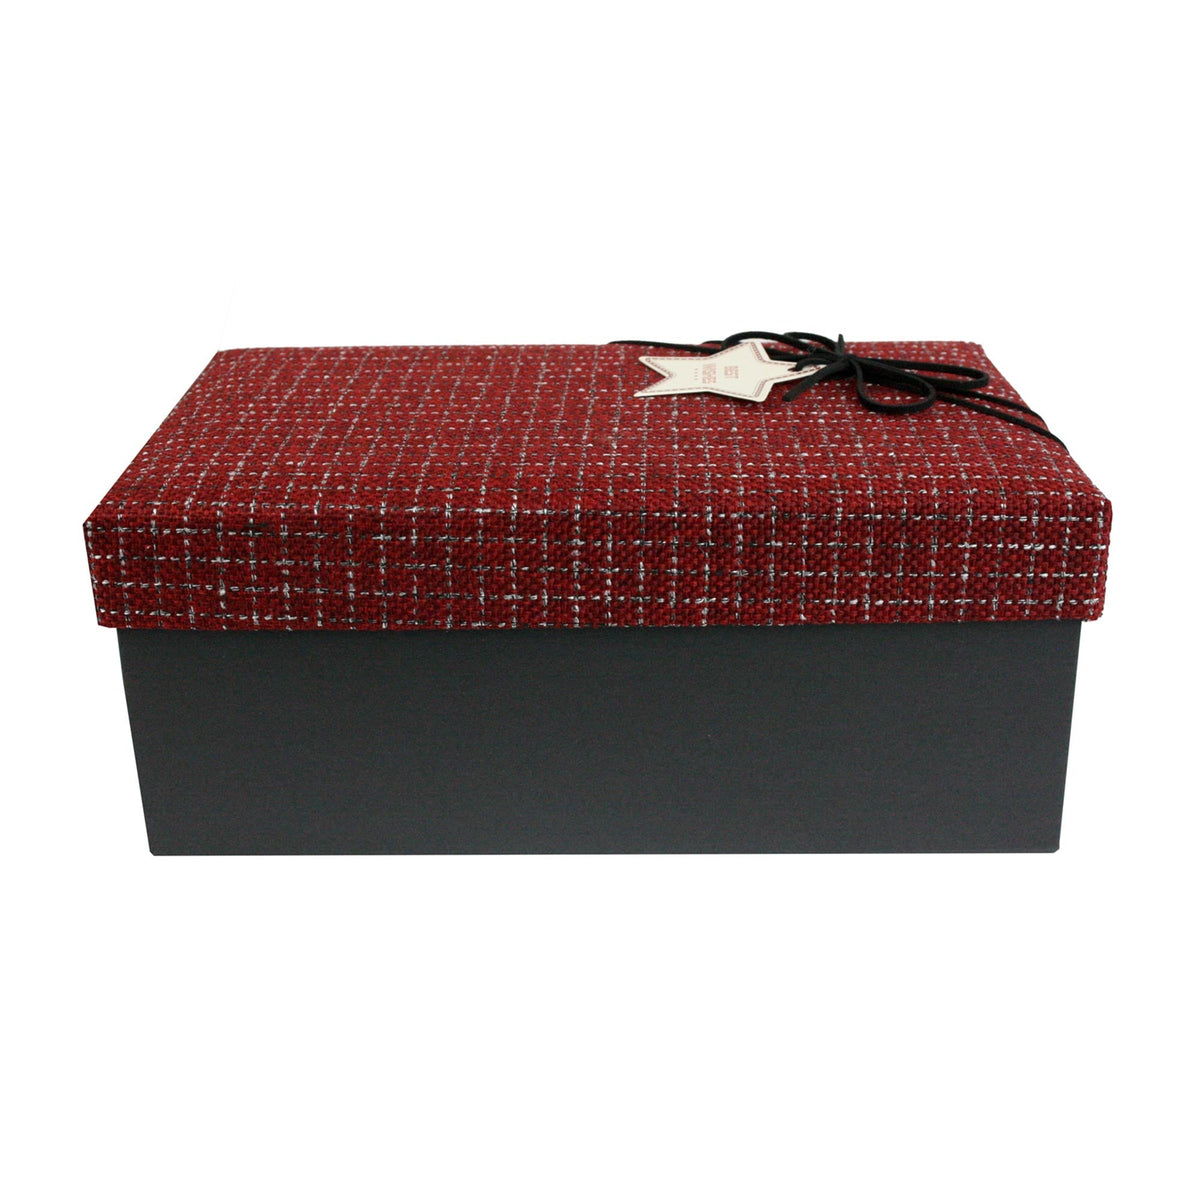 Single Black with Suede Decorative Ribbon Gift Box